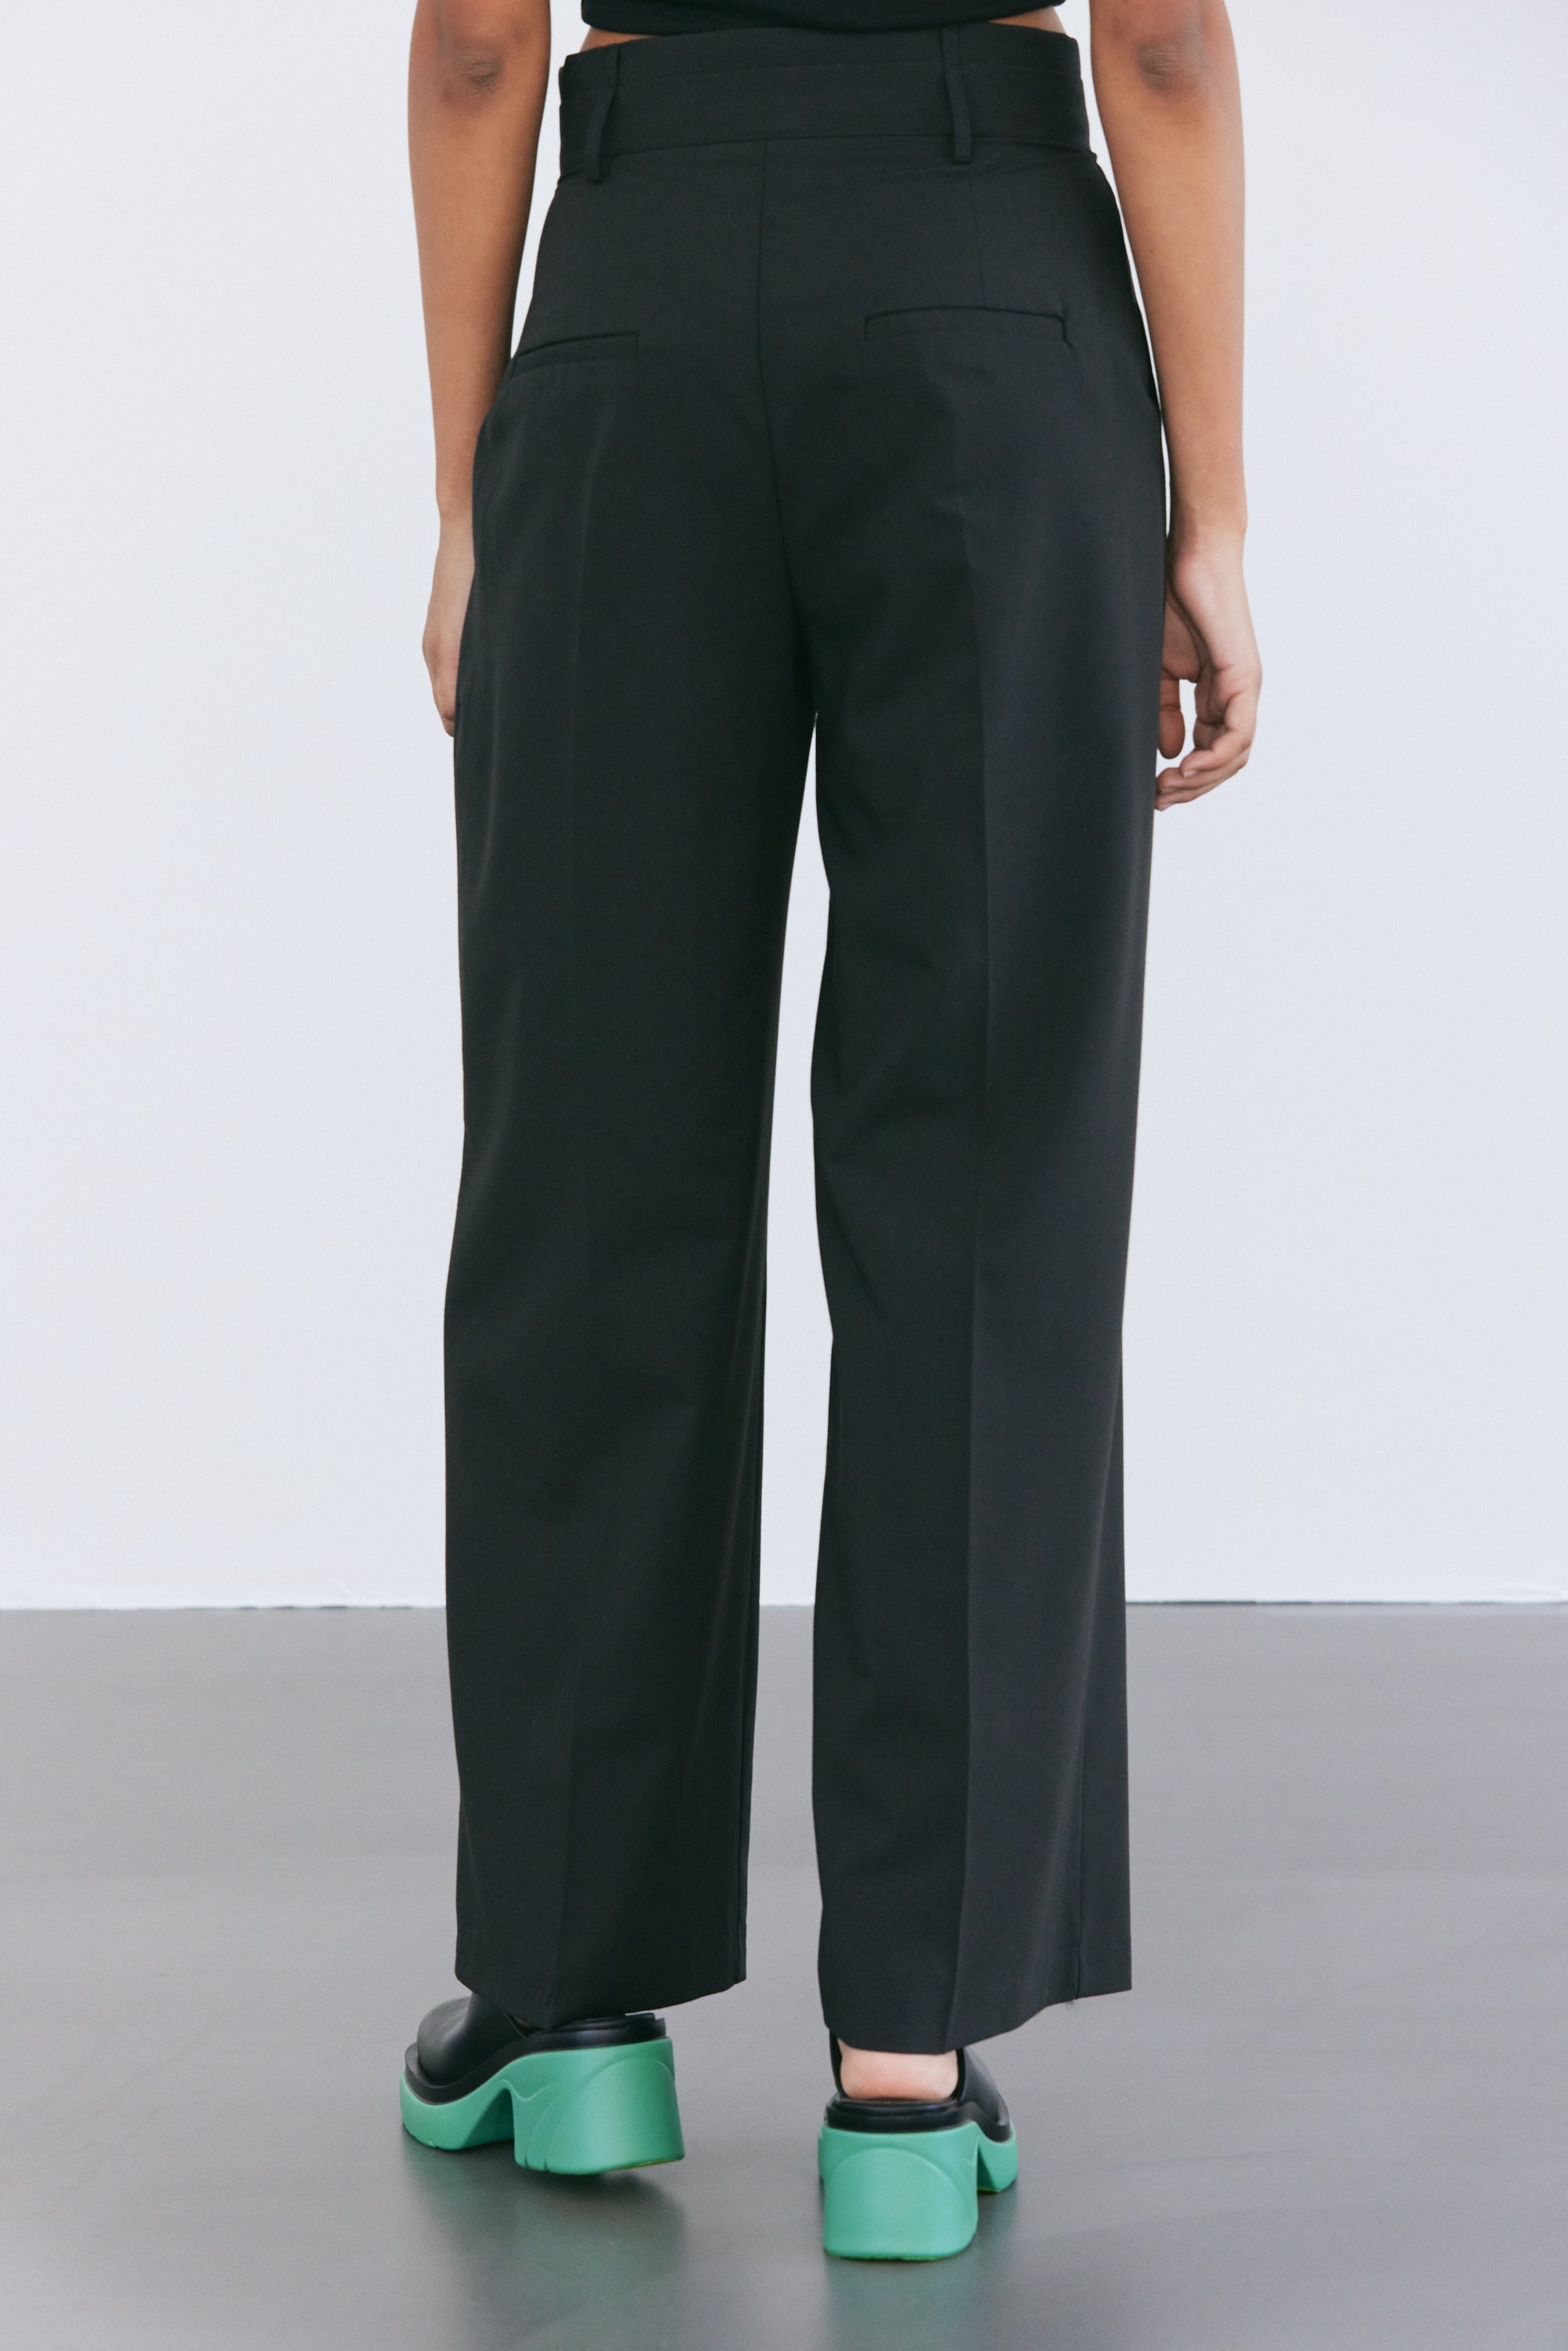 Half Belted Trousers, Black – SourceUnknown